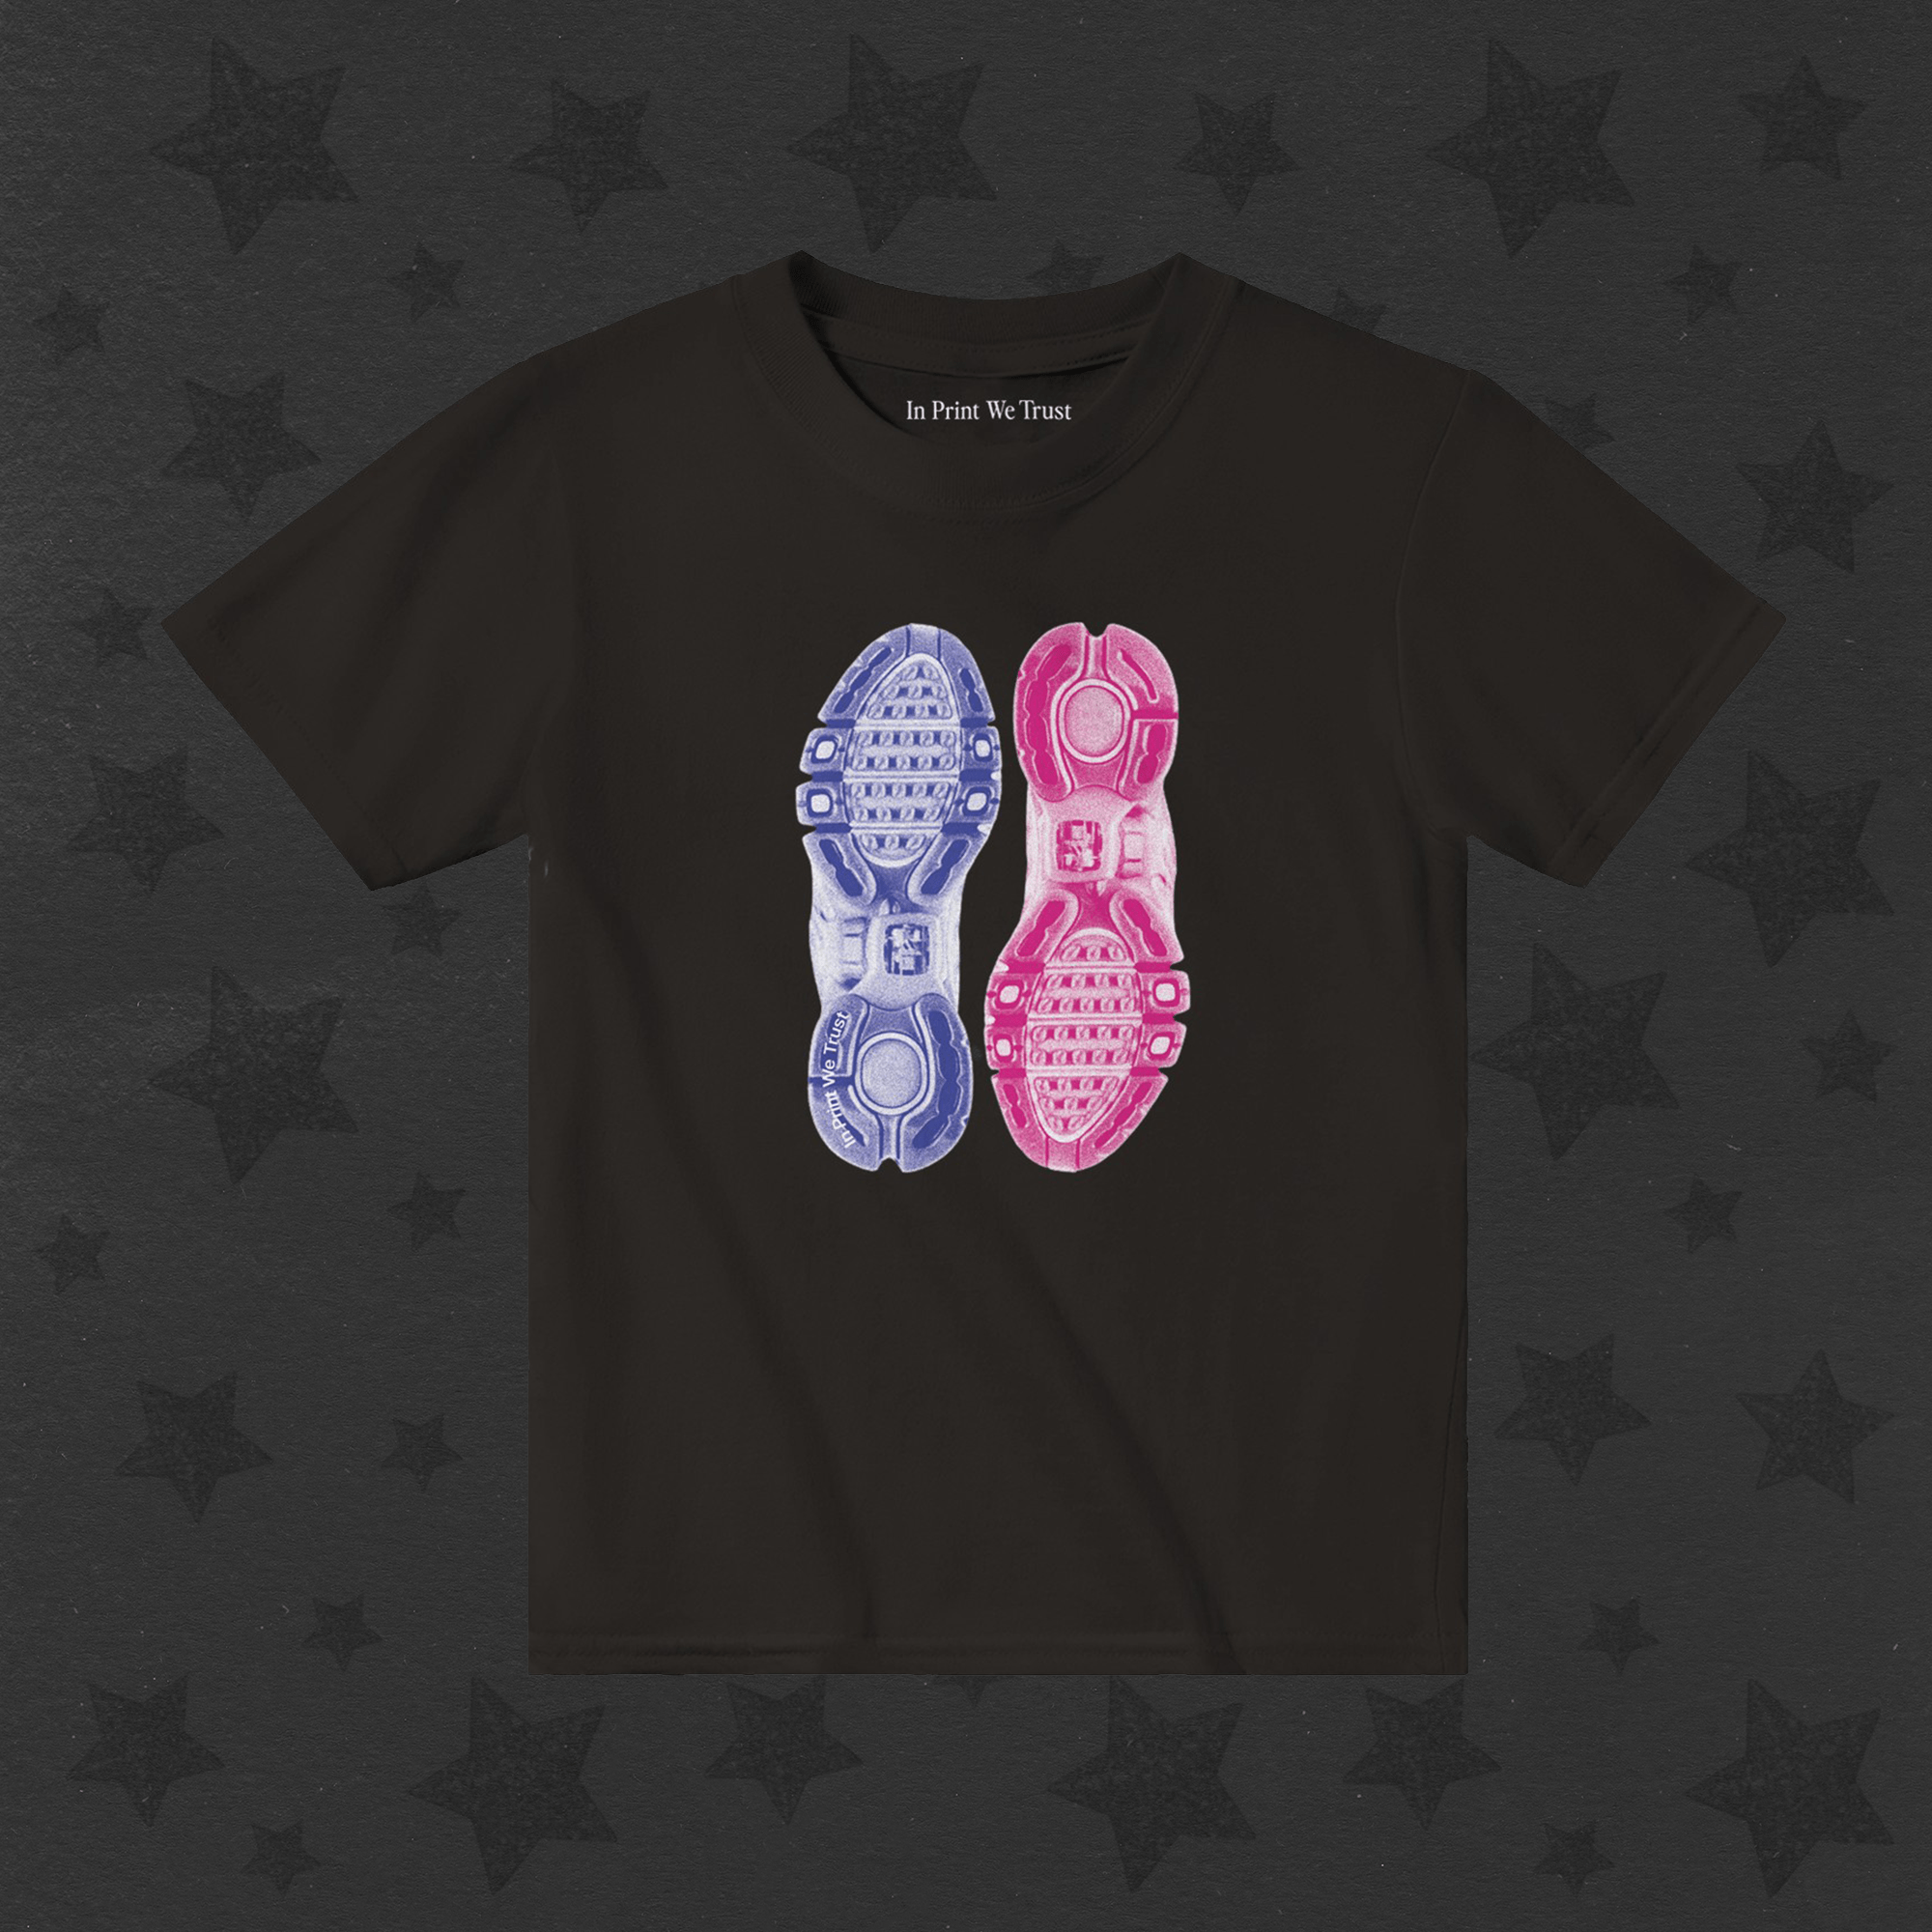 'We Come as a Pair' premium baby tee - In Print We Trust